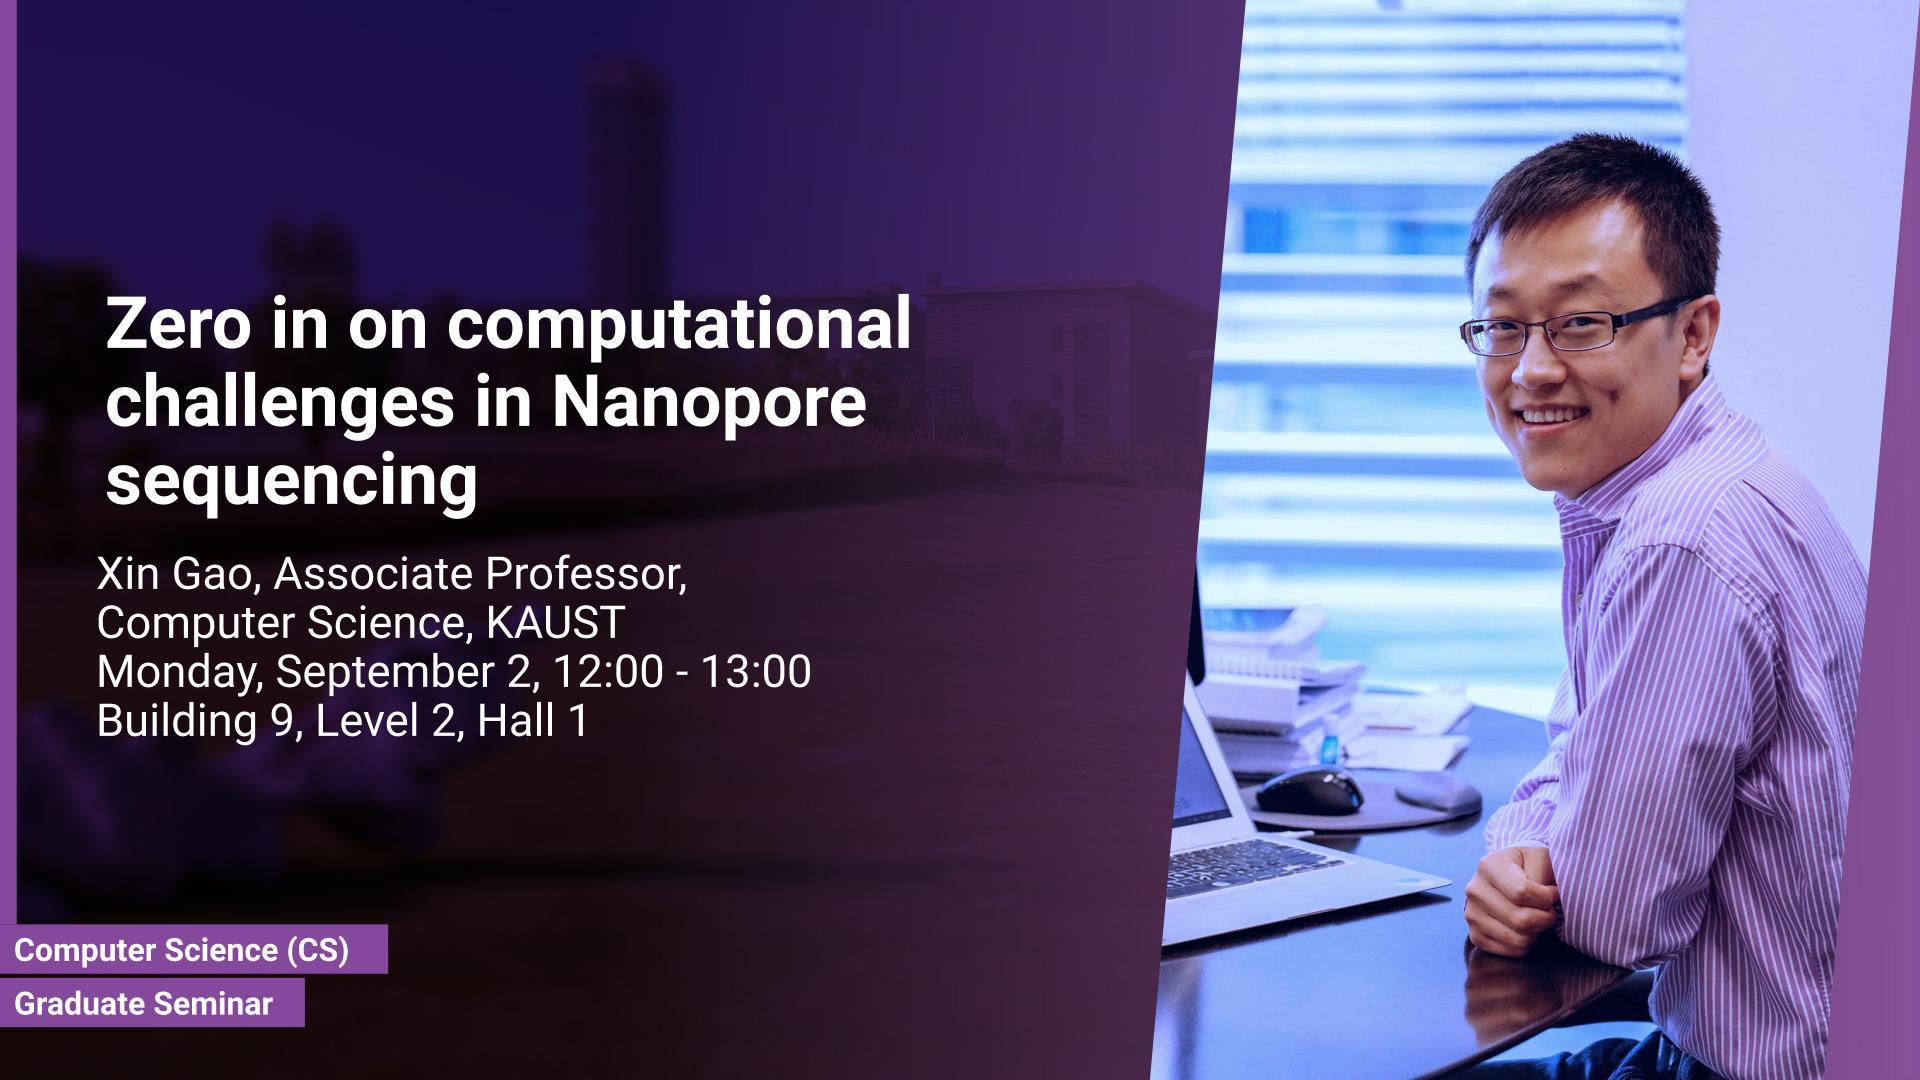 KAUST CEMSE CS Graduate Seminar Xin Gao zero in on computational challenges in nanopore sequencing